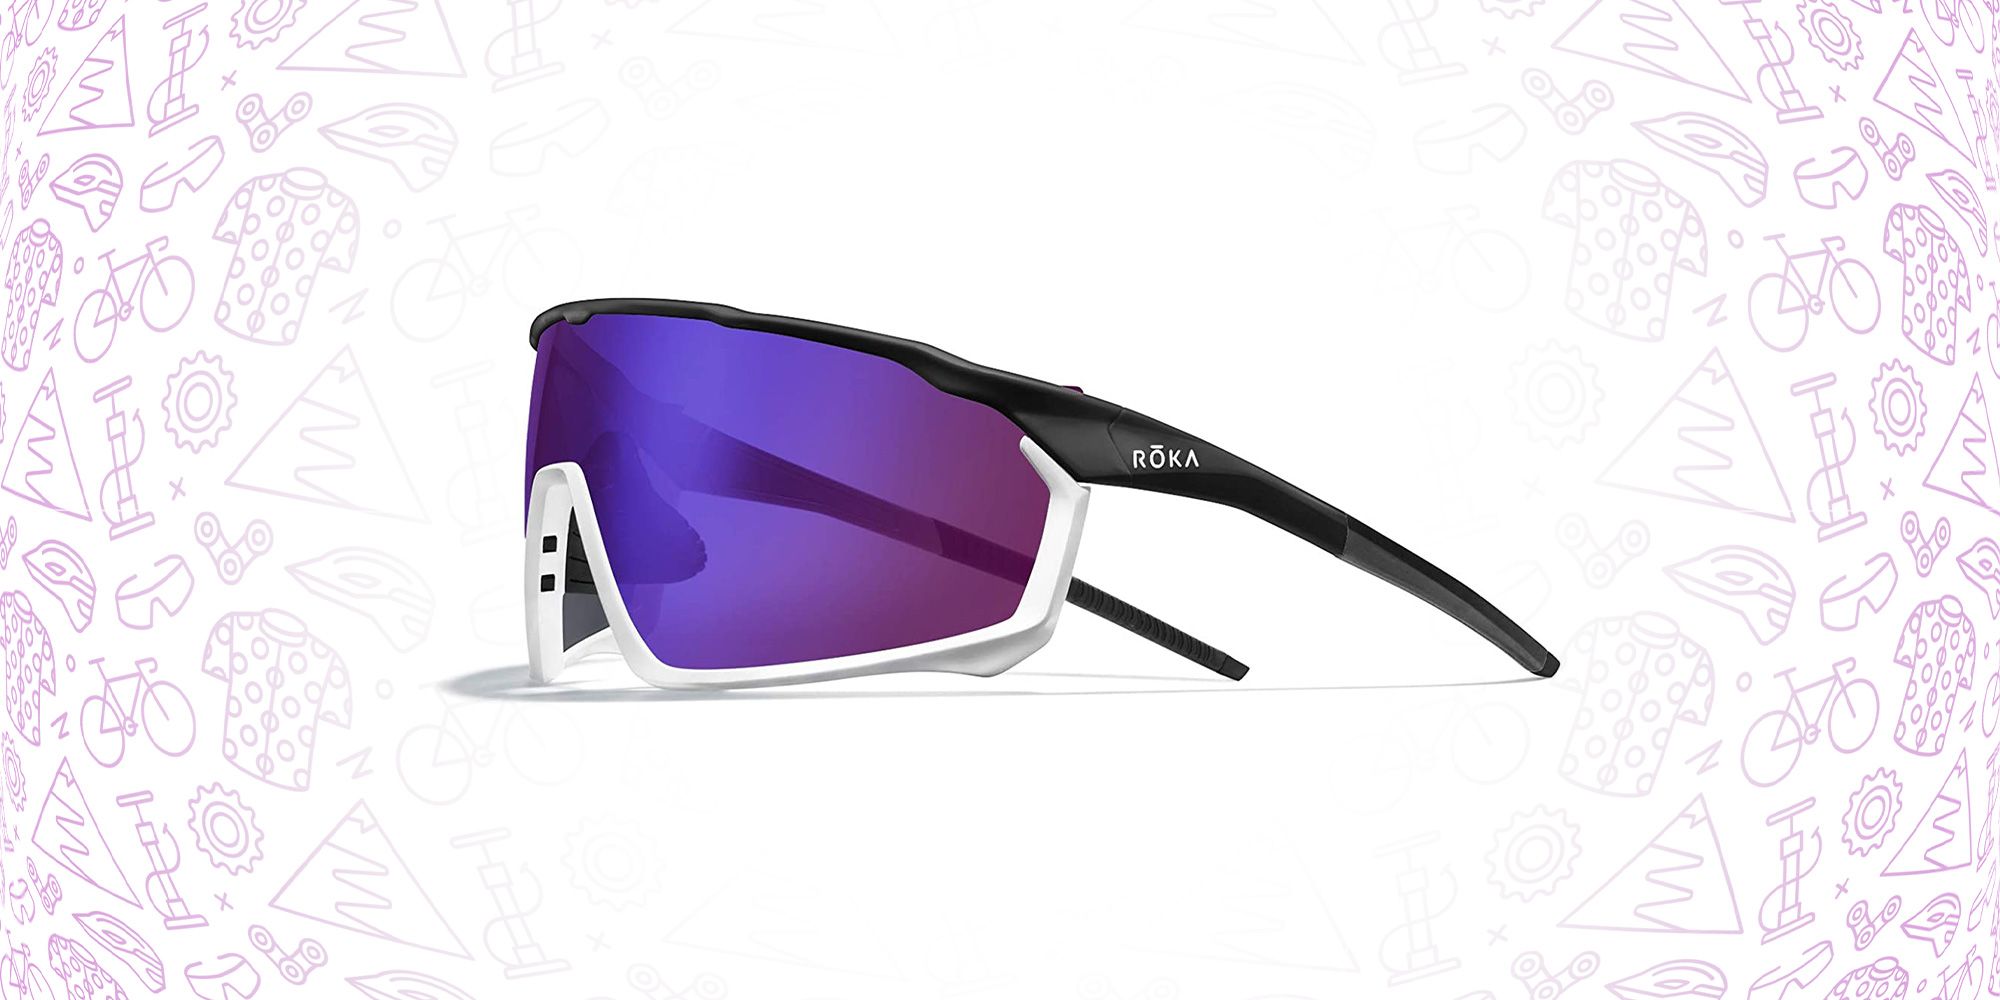 Buy Cycling Sunglasses Online at Best Prices - Cambio Bikes